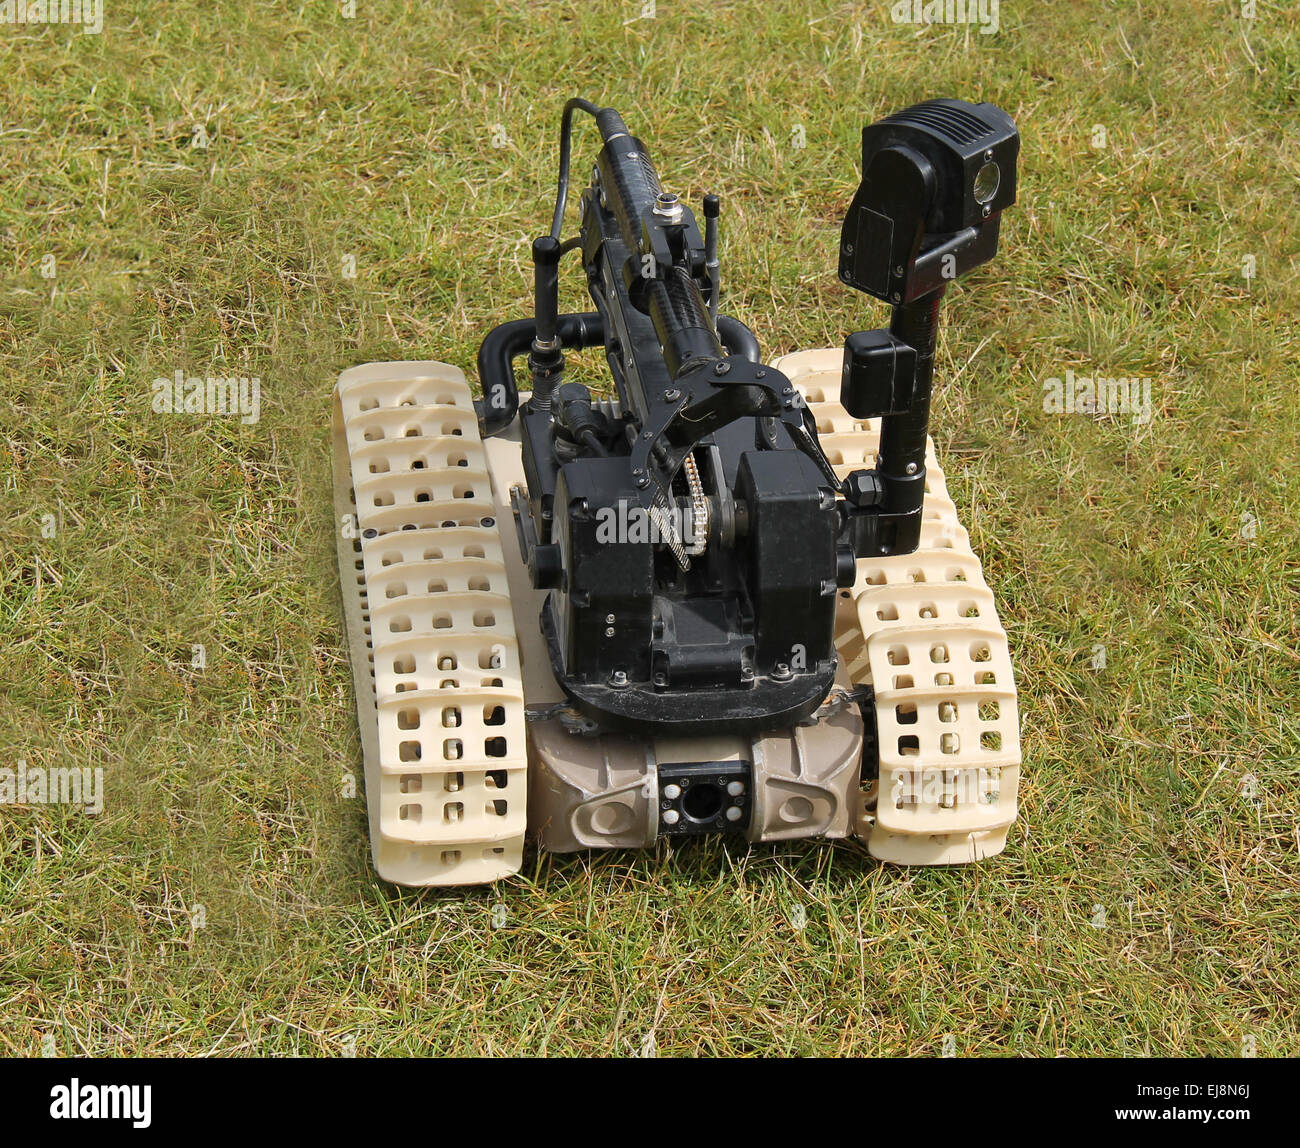 A Bomb Disposal Remote Control Robot Device. Stock Photo